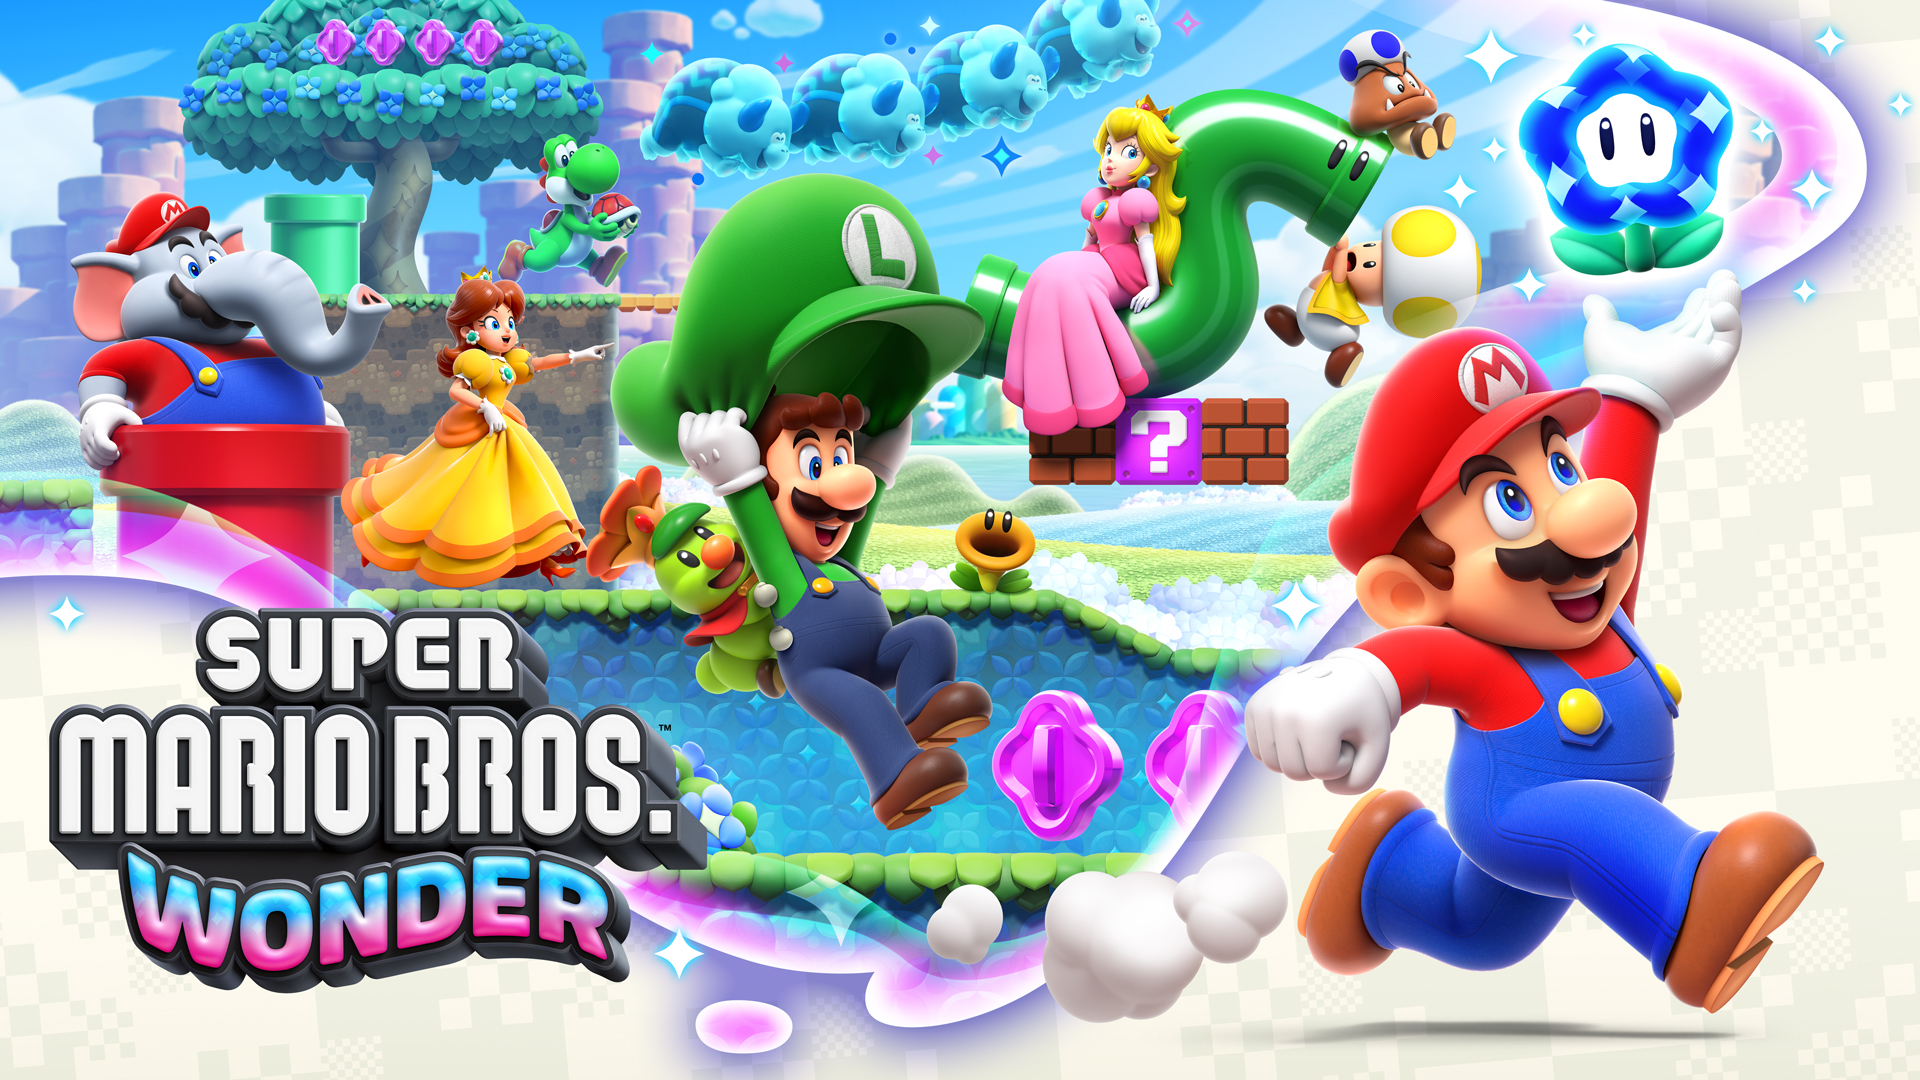 Run and jump together in co-op adventure Super Mario Bros. Wonder, out now